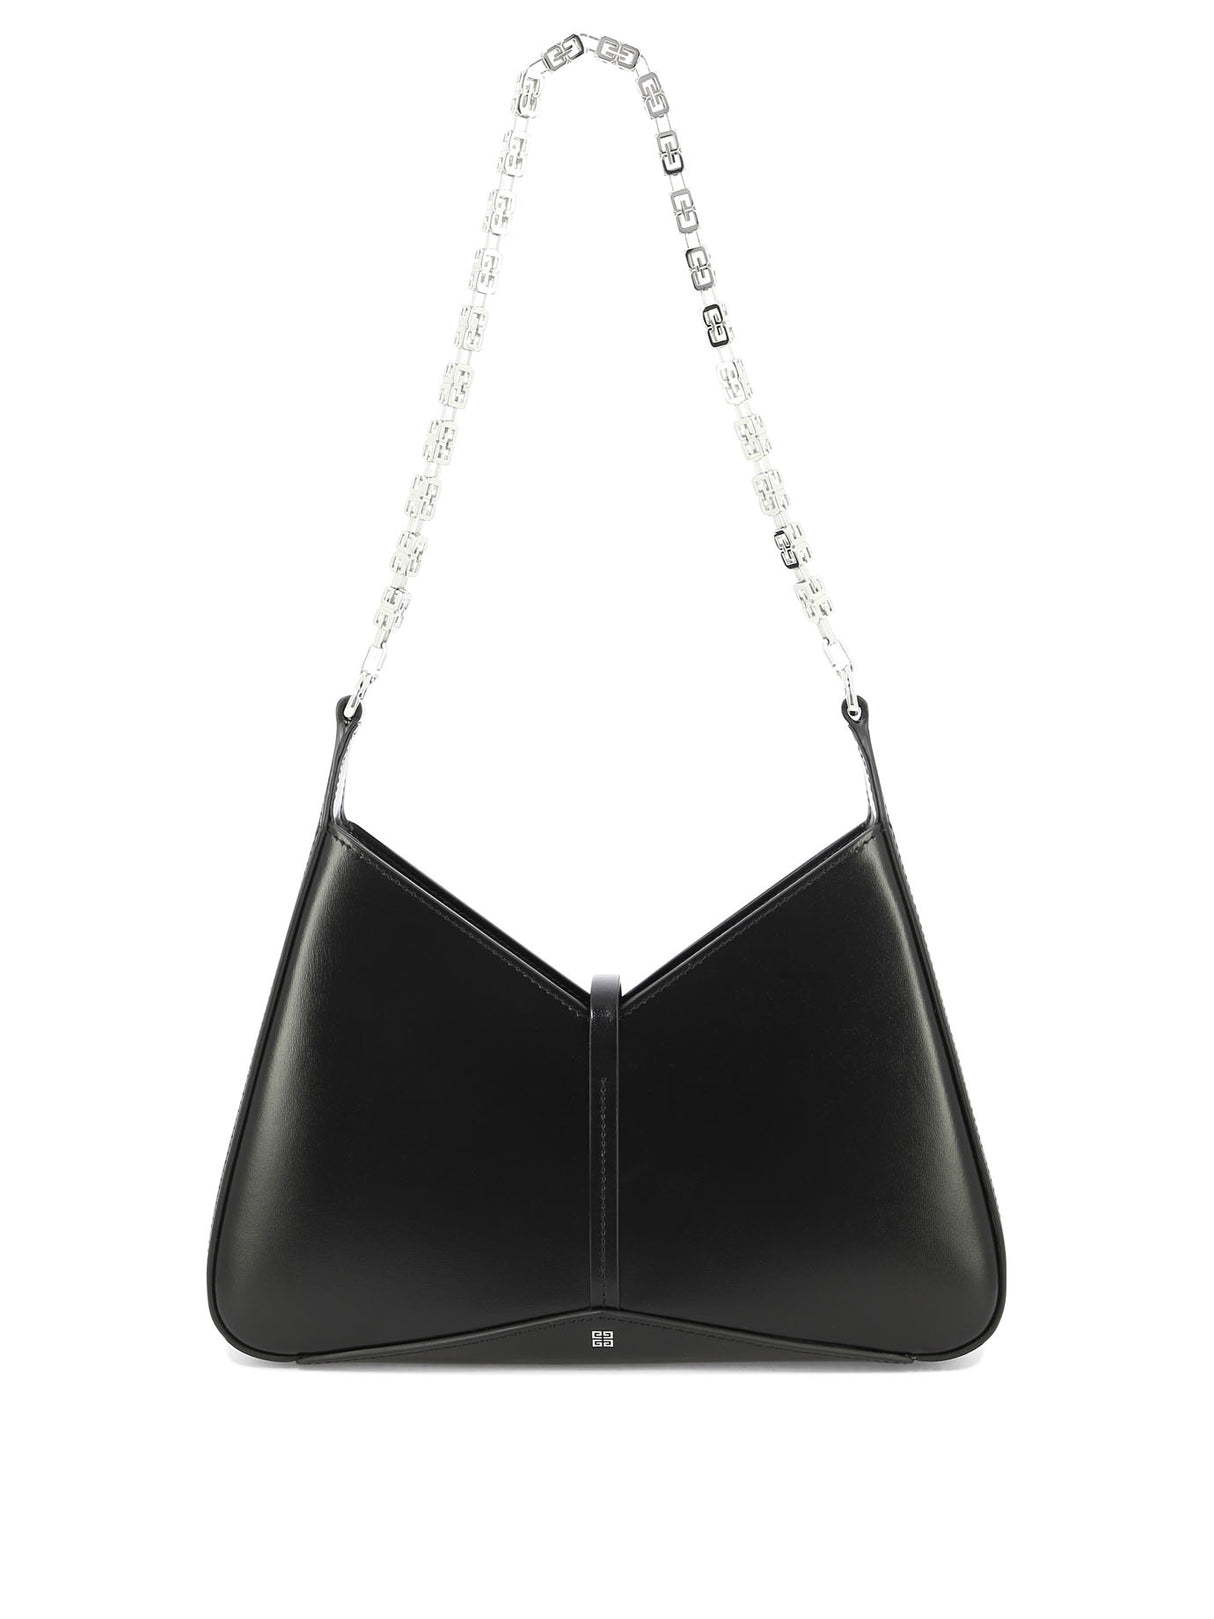 GIVENCHY Chic Mini Cut-Out Shoulder Bag with V-Cut and G-Cube Chain Detail in Black Leather